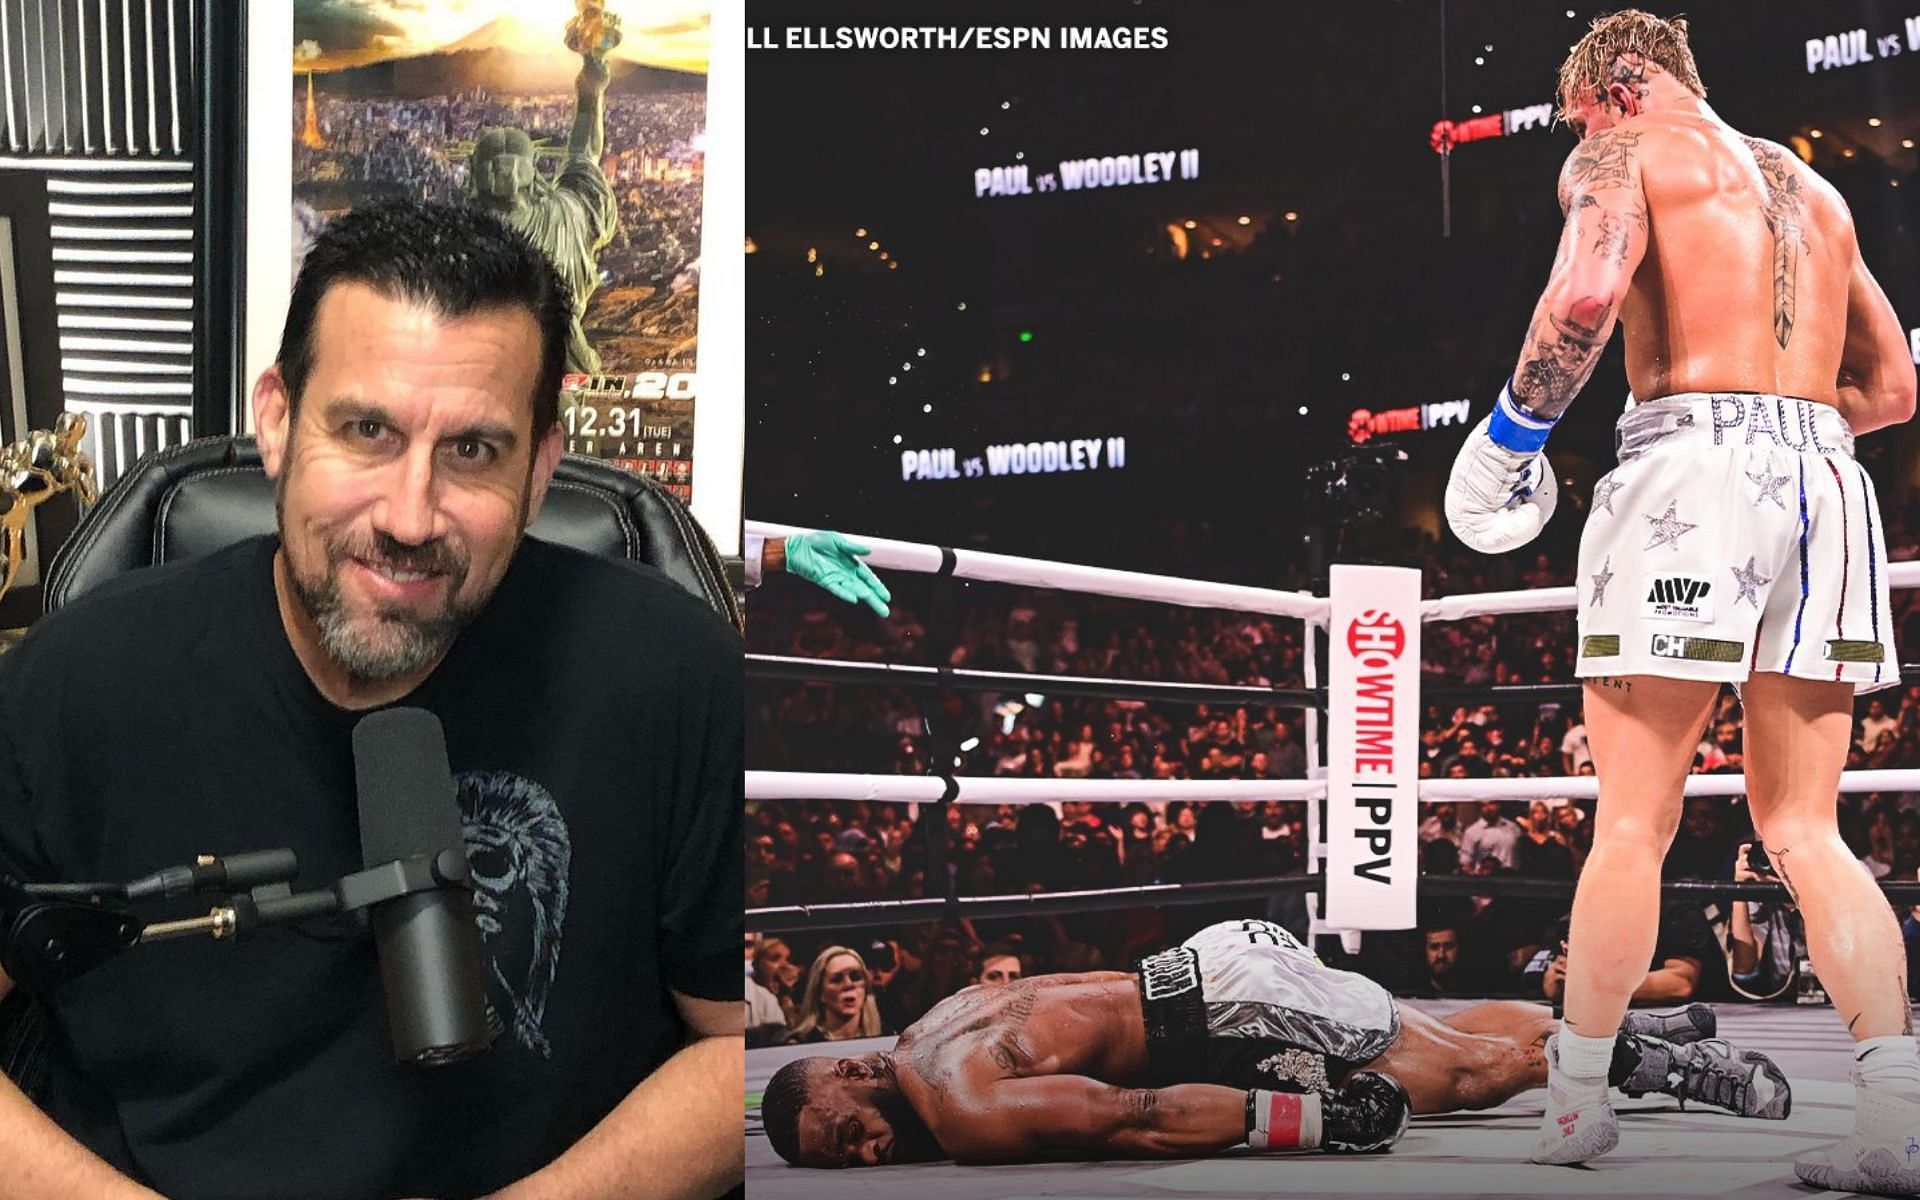 Former MMA referee John McCarthy criticized the second fight between Jake Paul and Tyron Woodley [Credits: @espnmma, @johnmccarthymma via Instagram]